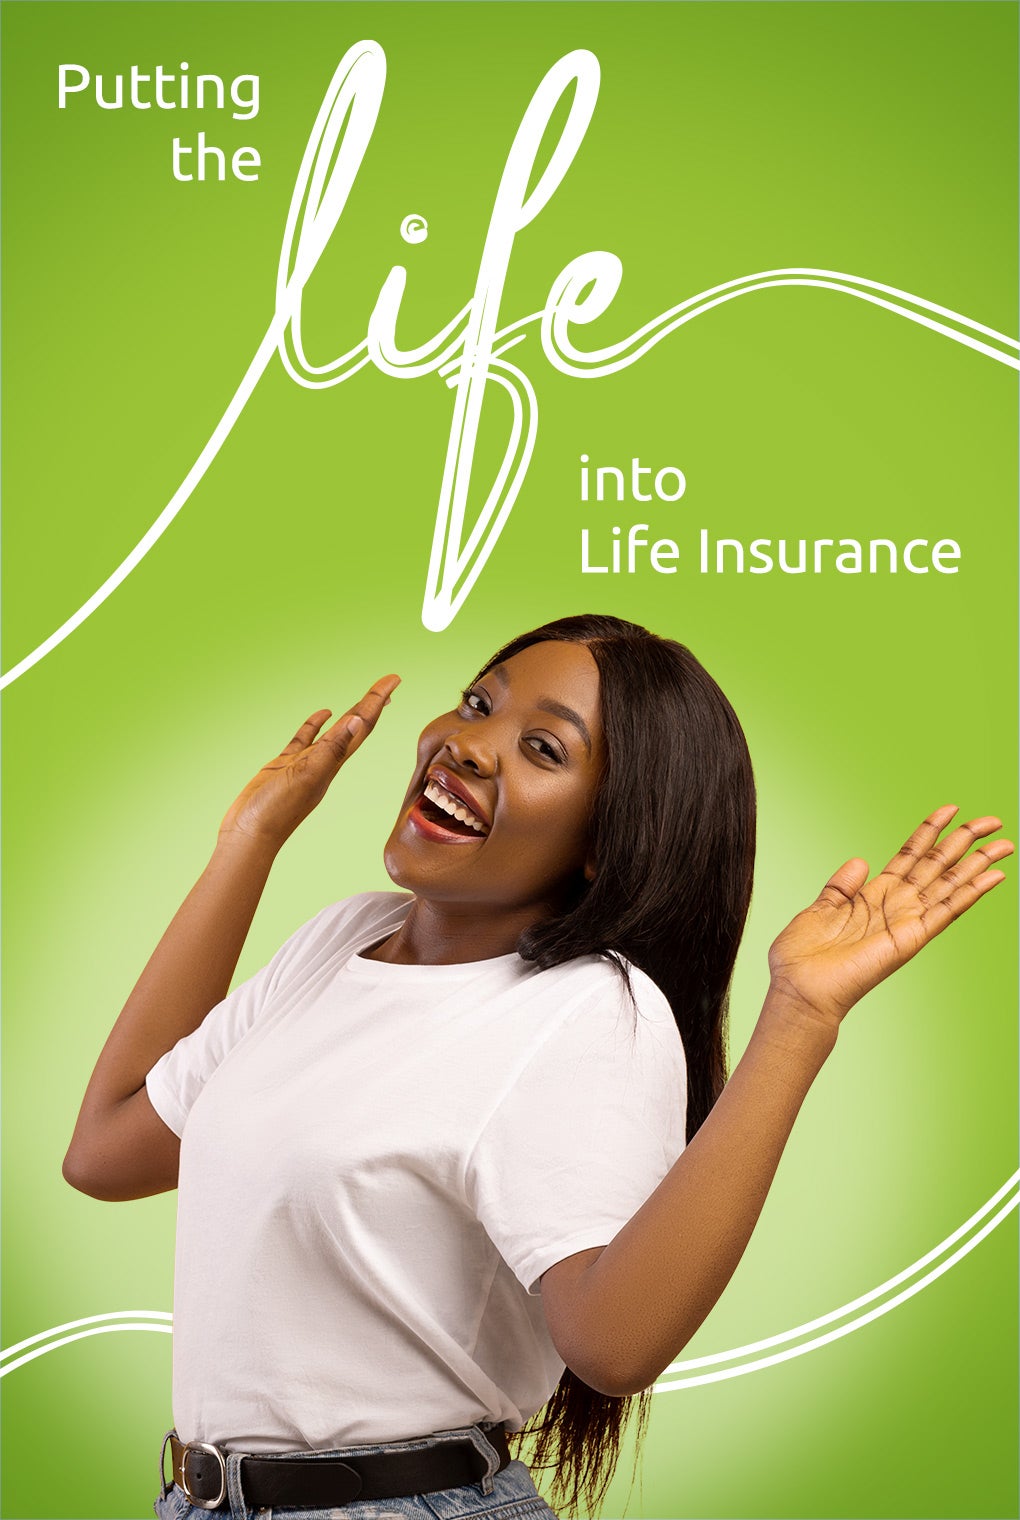 Putting the life into Life Insurance